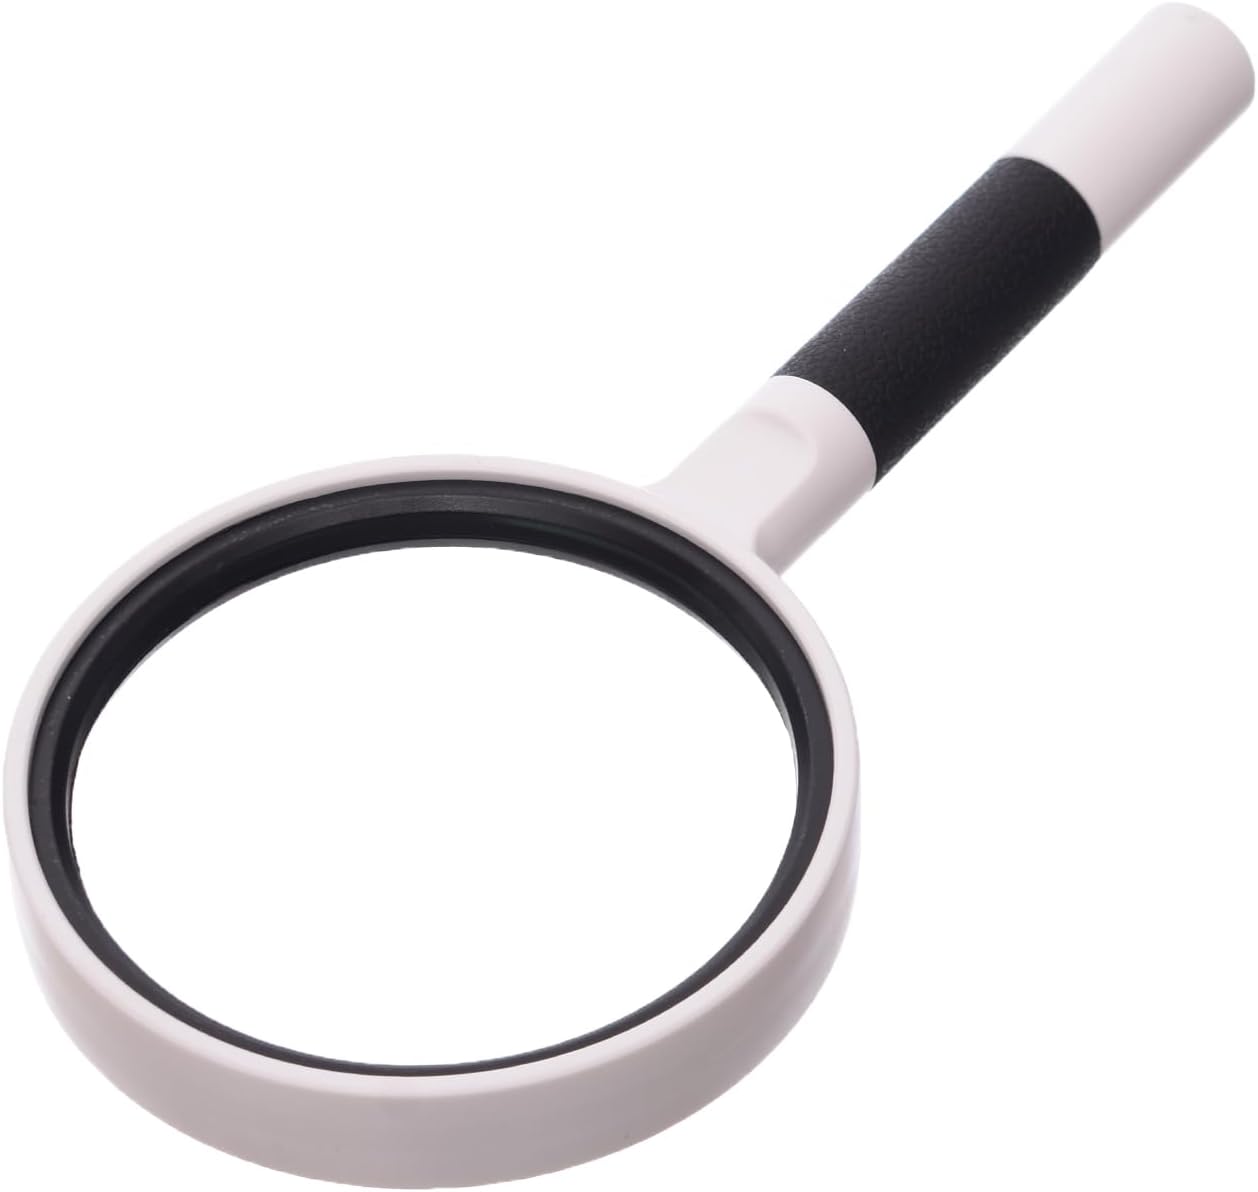 Xsmgx XSM-8075 High Quality Magnifier Size 75 mm For Office, Student - White Black